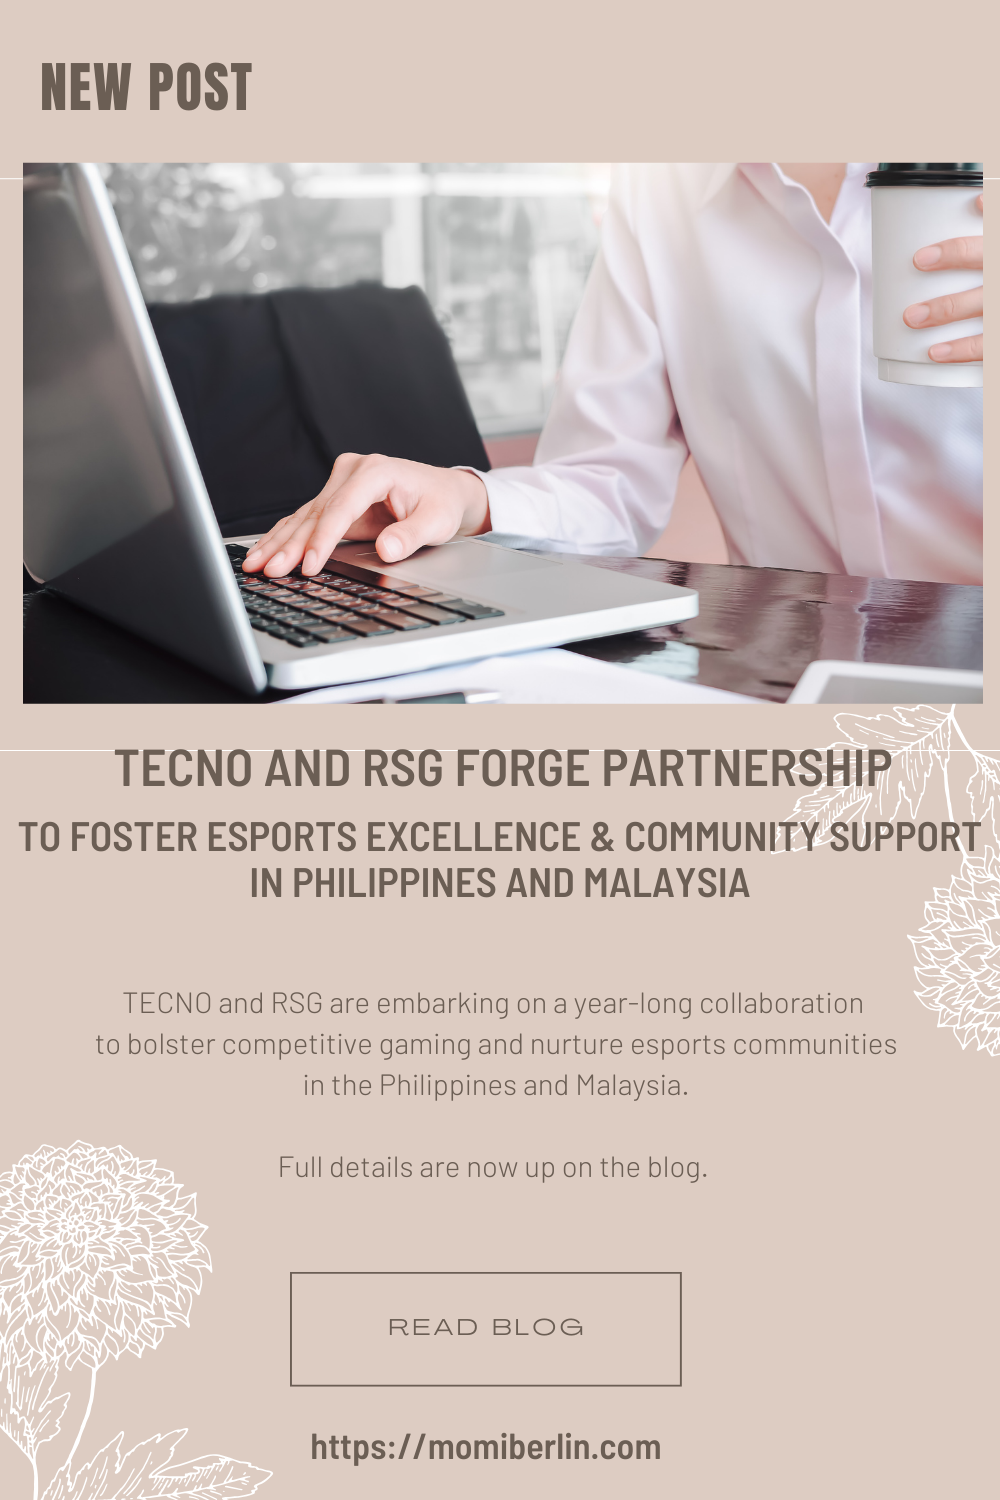 TECNO and RSG Forge Partnership to Foster Esports Excellence and Community Support in Philippines and Malaysia